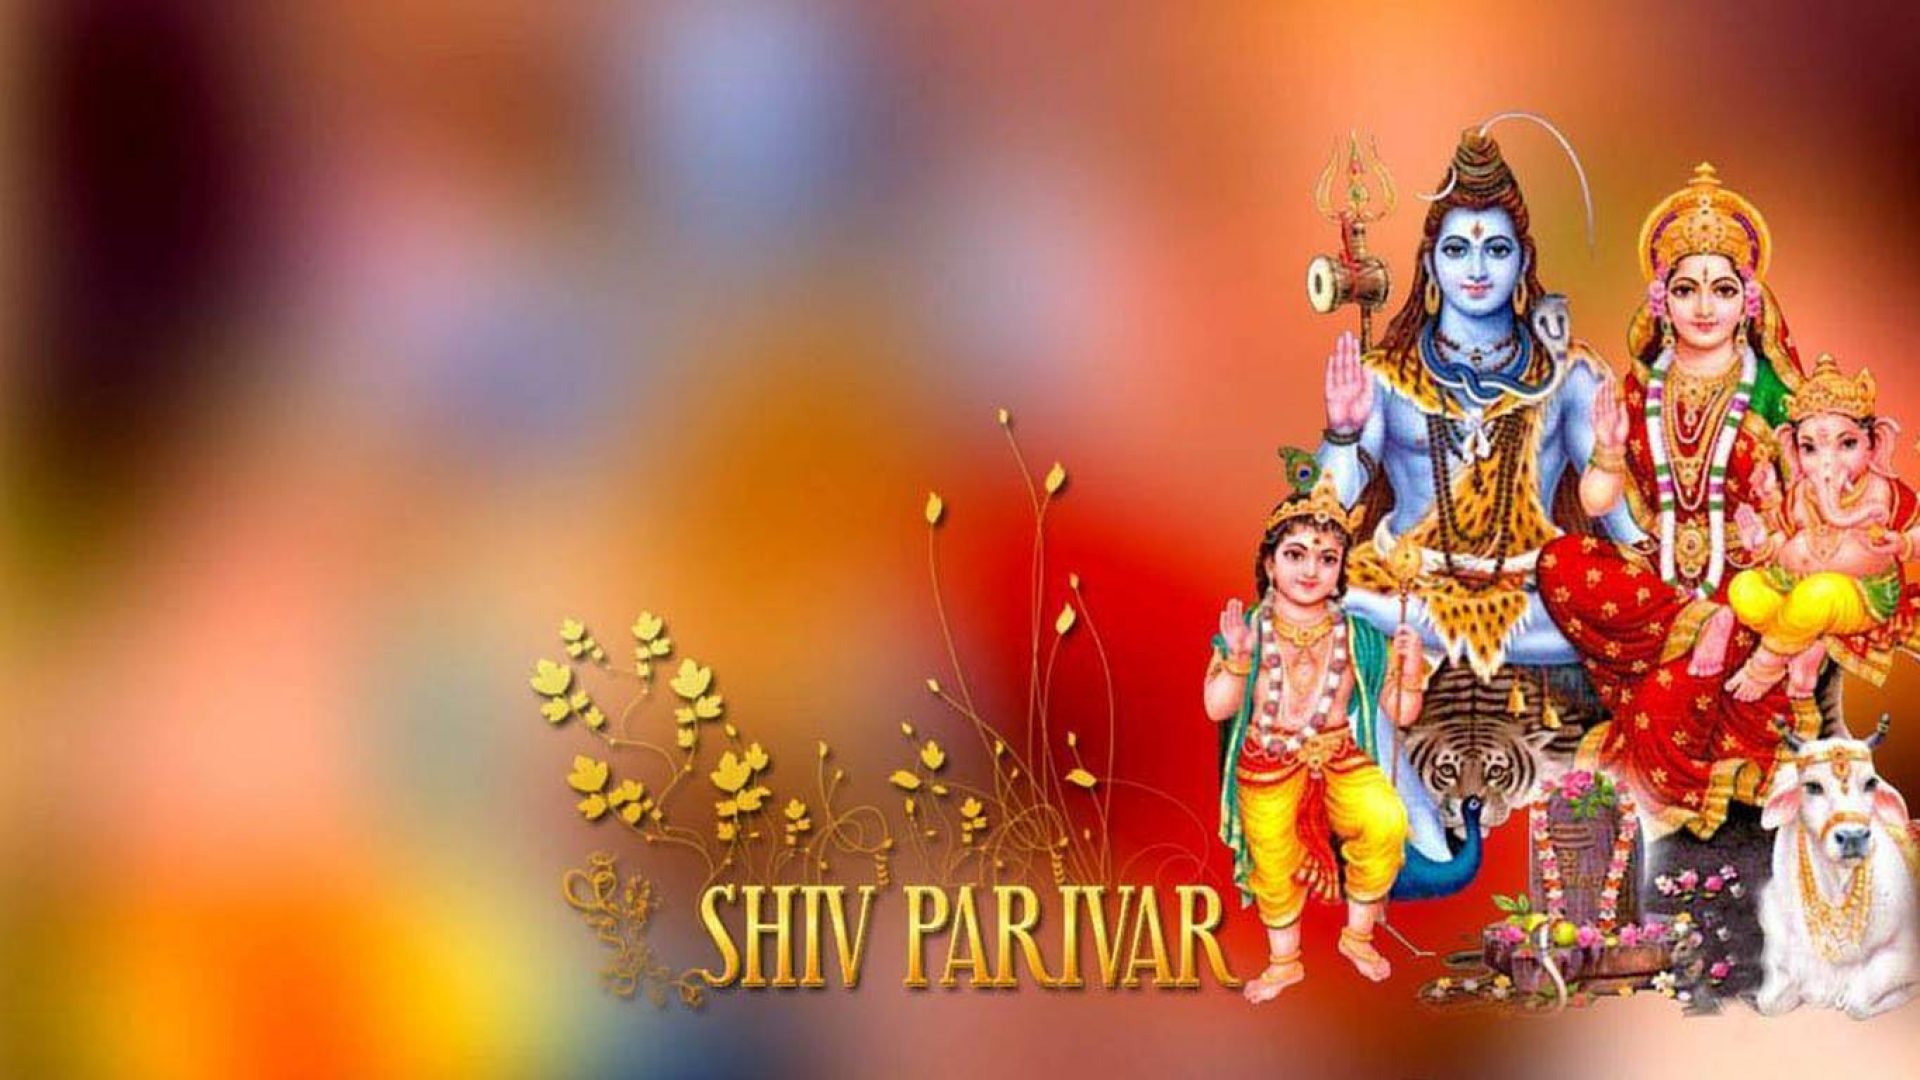 Shiv Parivar Images Hd Free Download - God HD Wallpapers